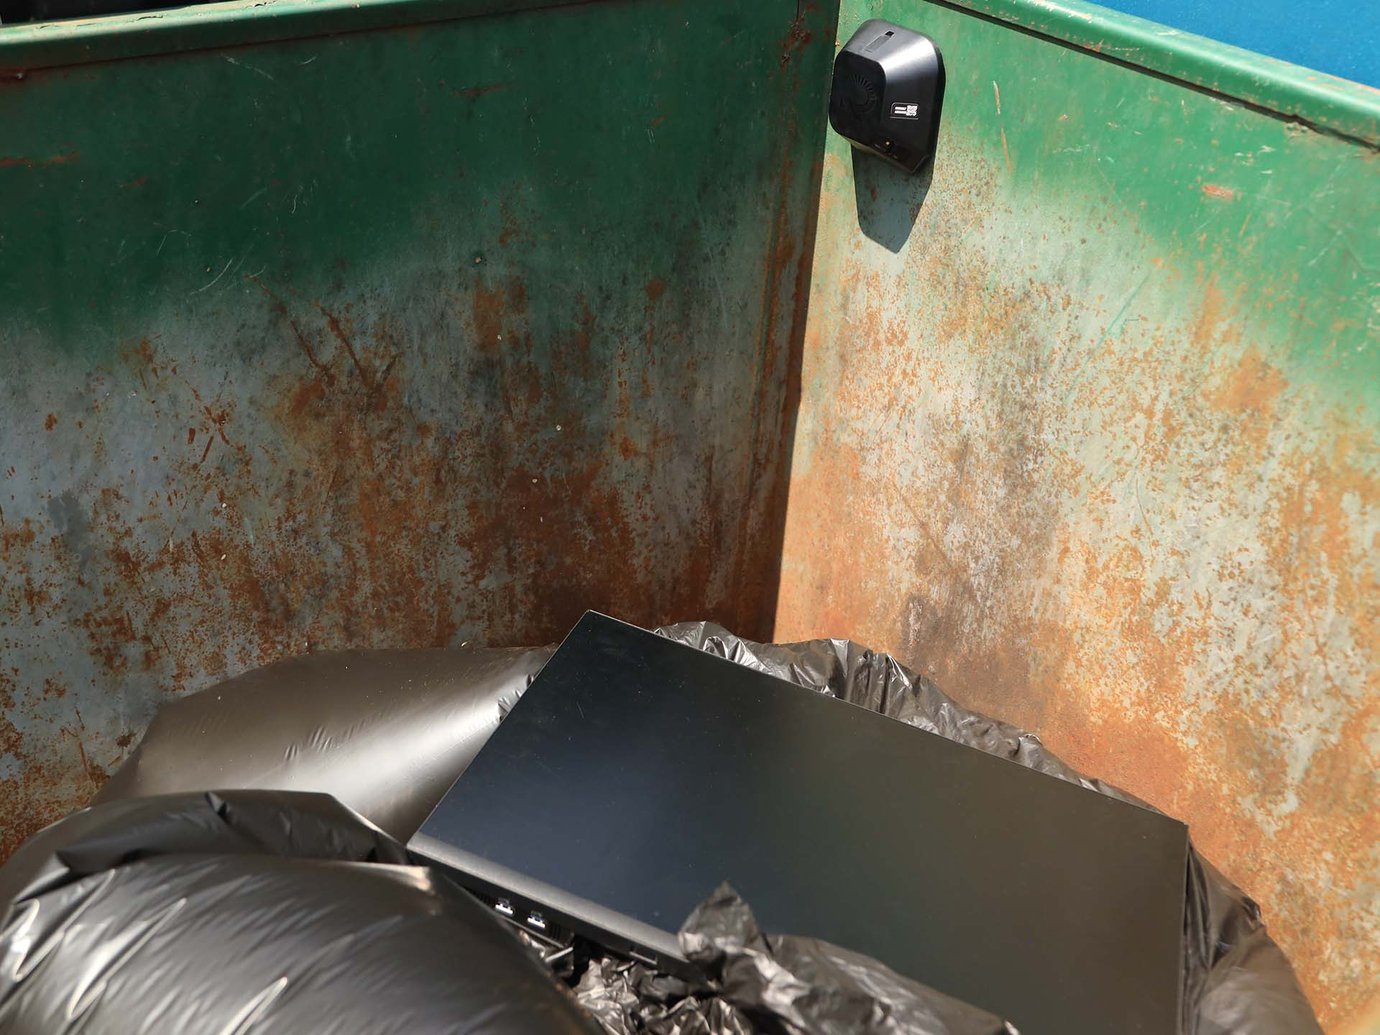 a trash dumpster filled with garbage bags and a computer monitor